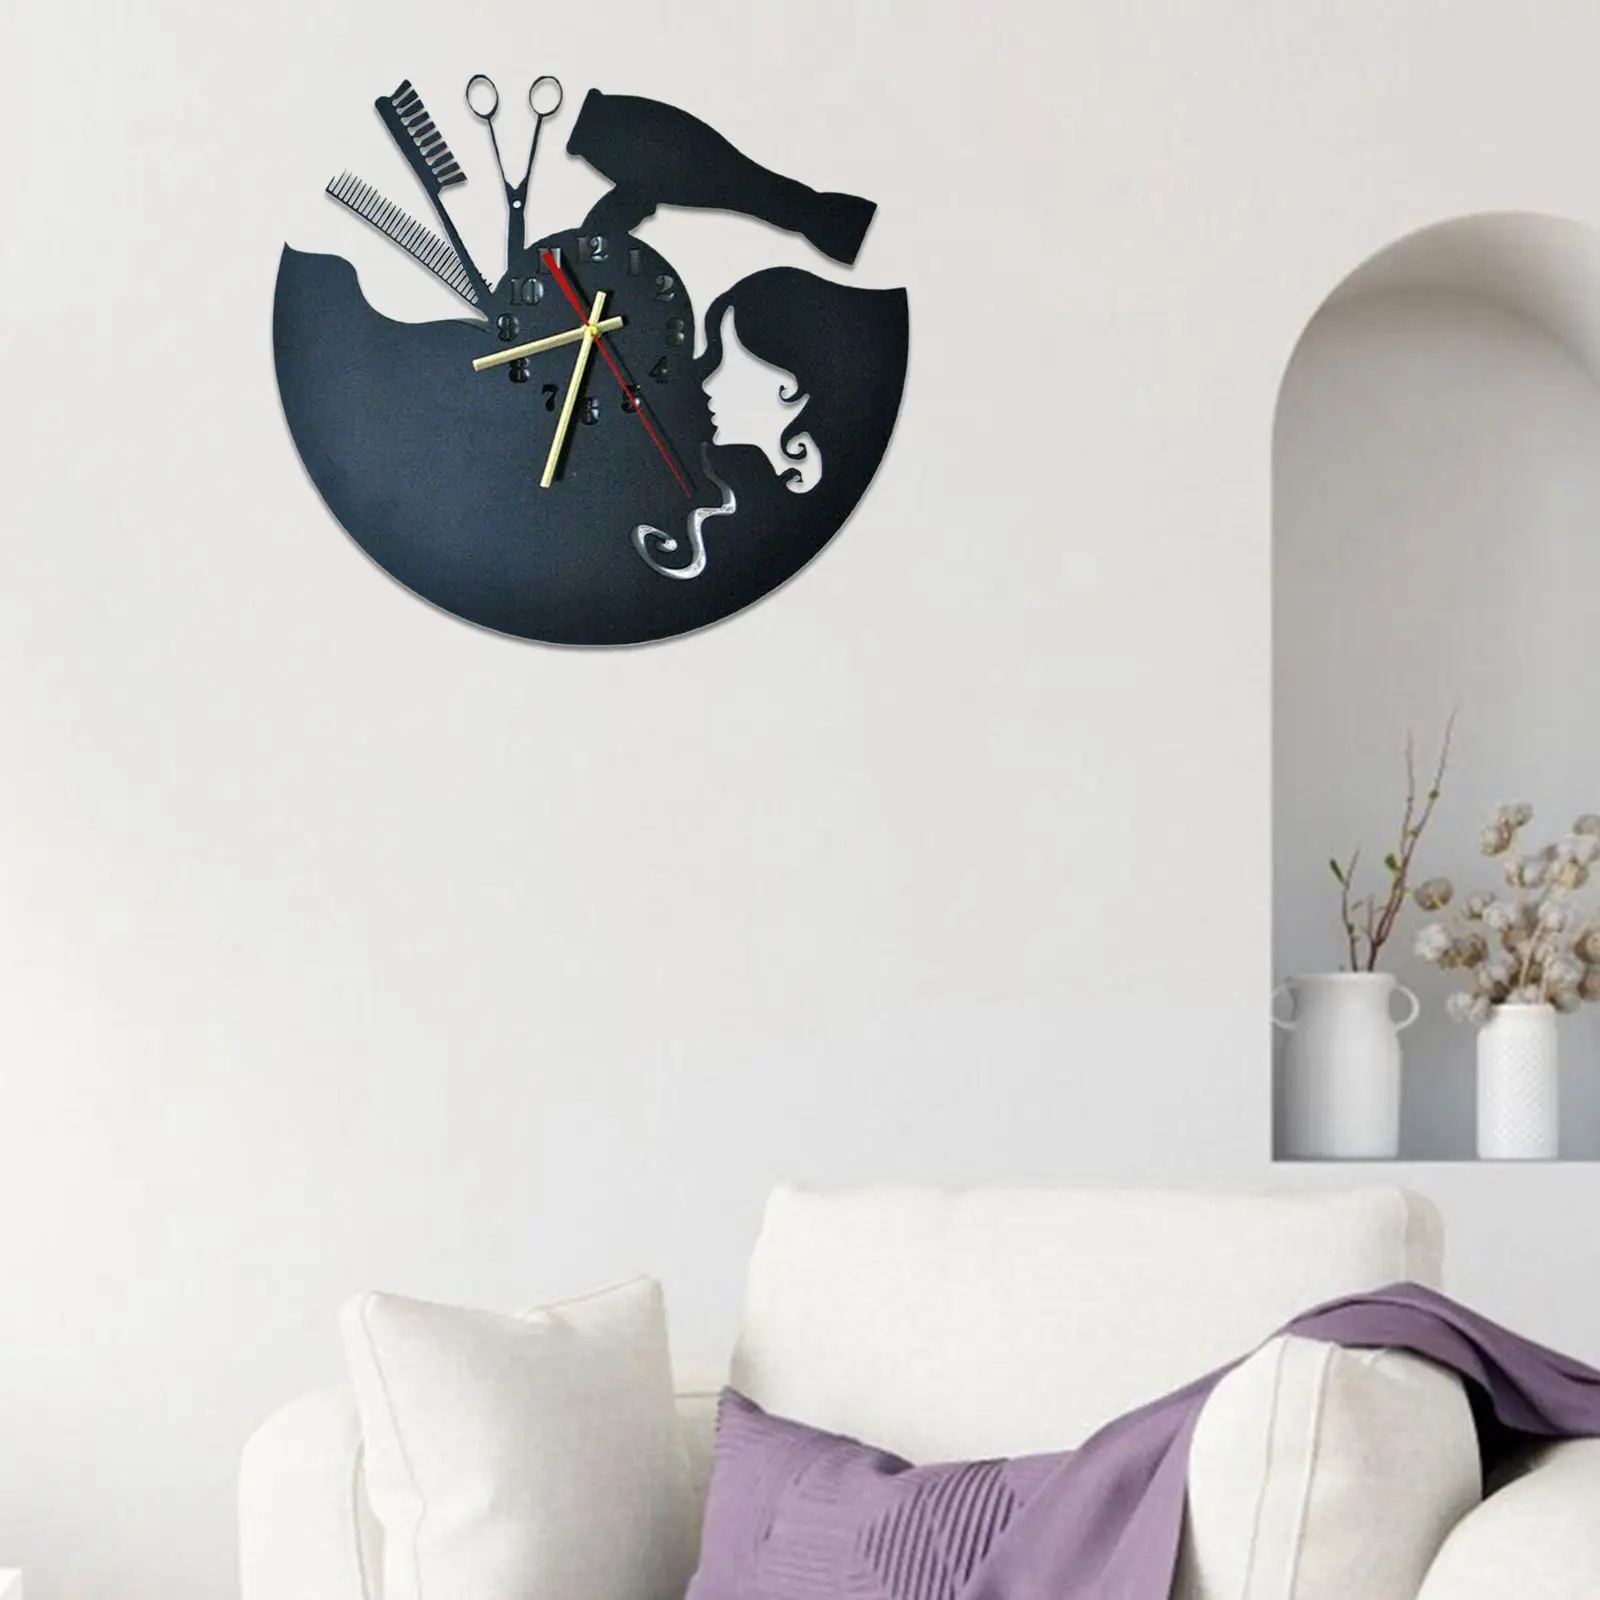 Hairdresser Wall Clock Silent Non Ticking Black for Art Decorations Classroom Home Office